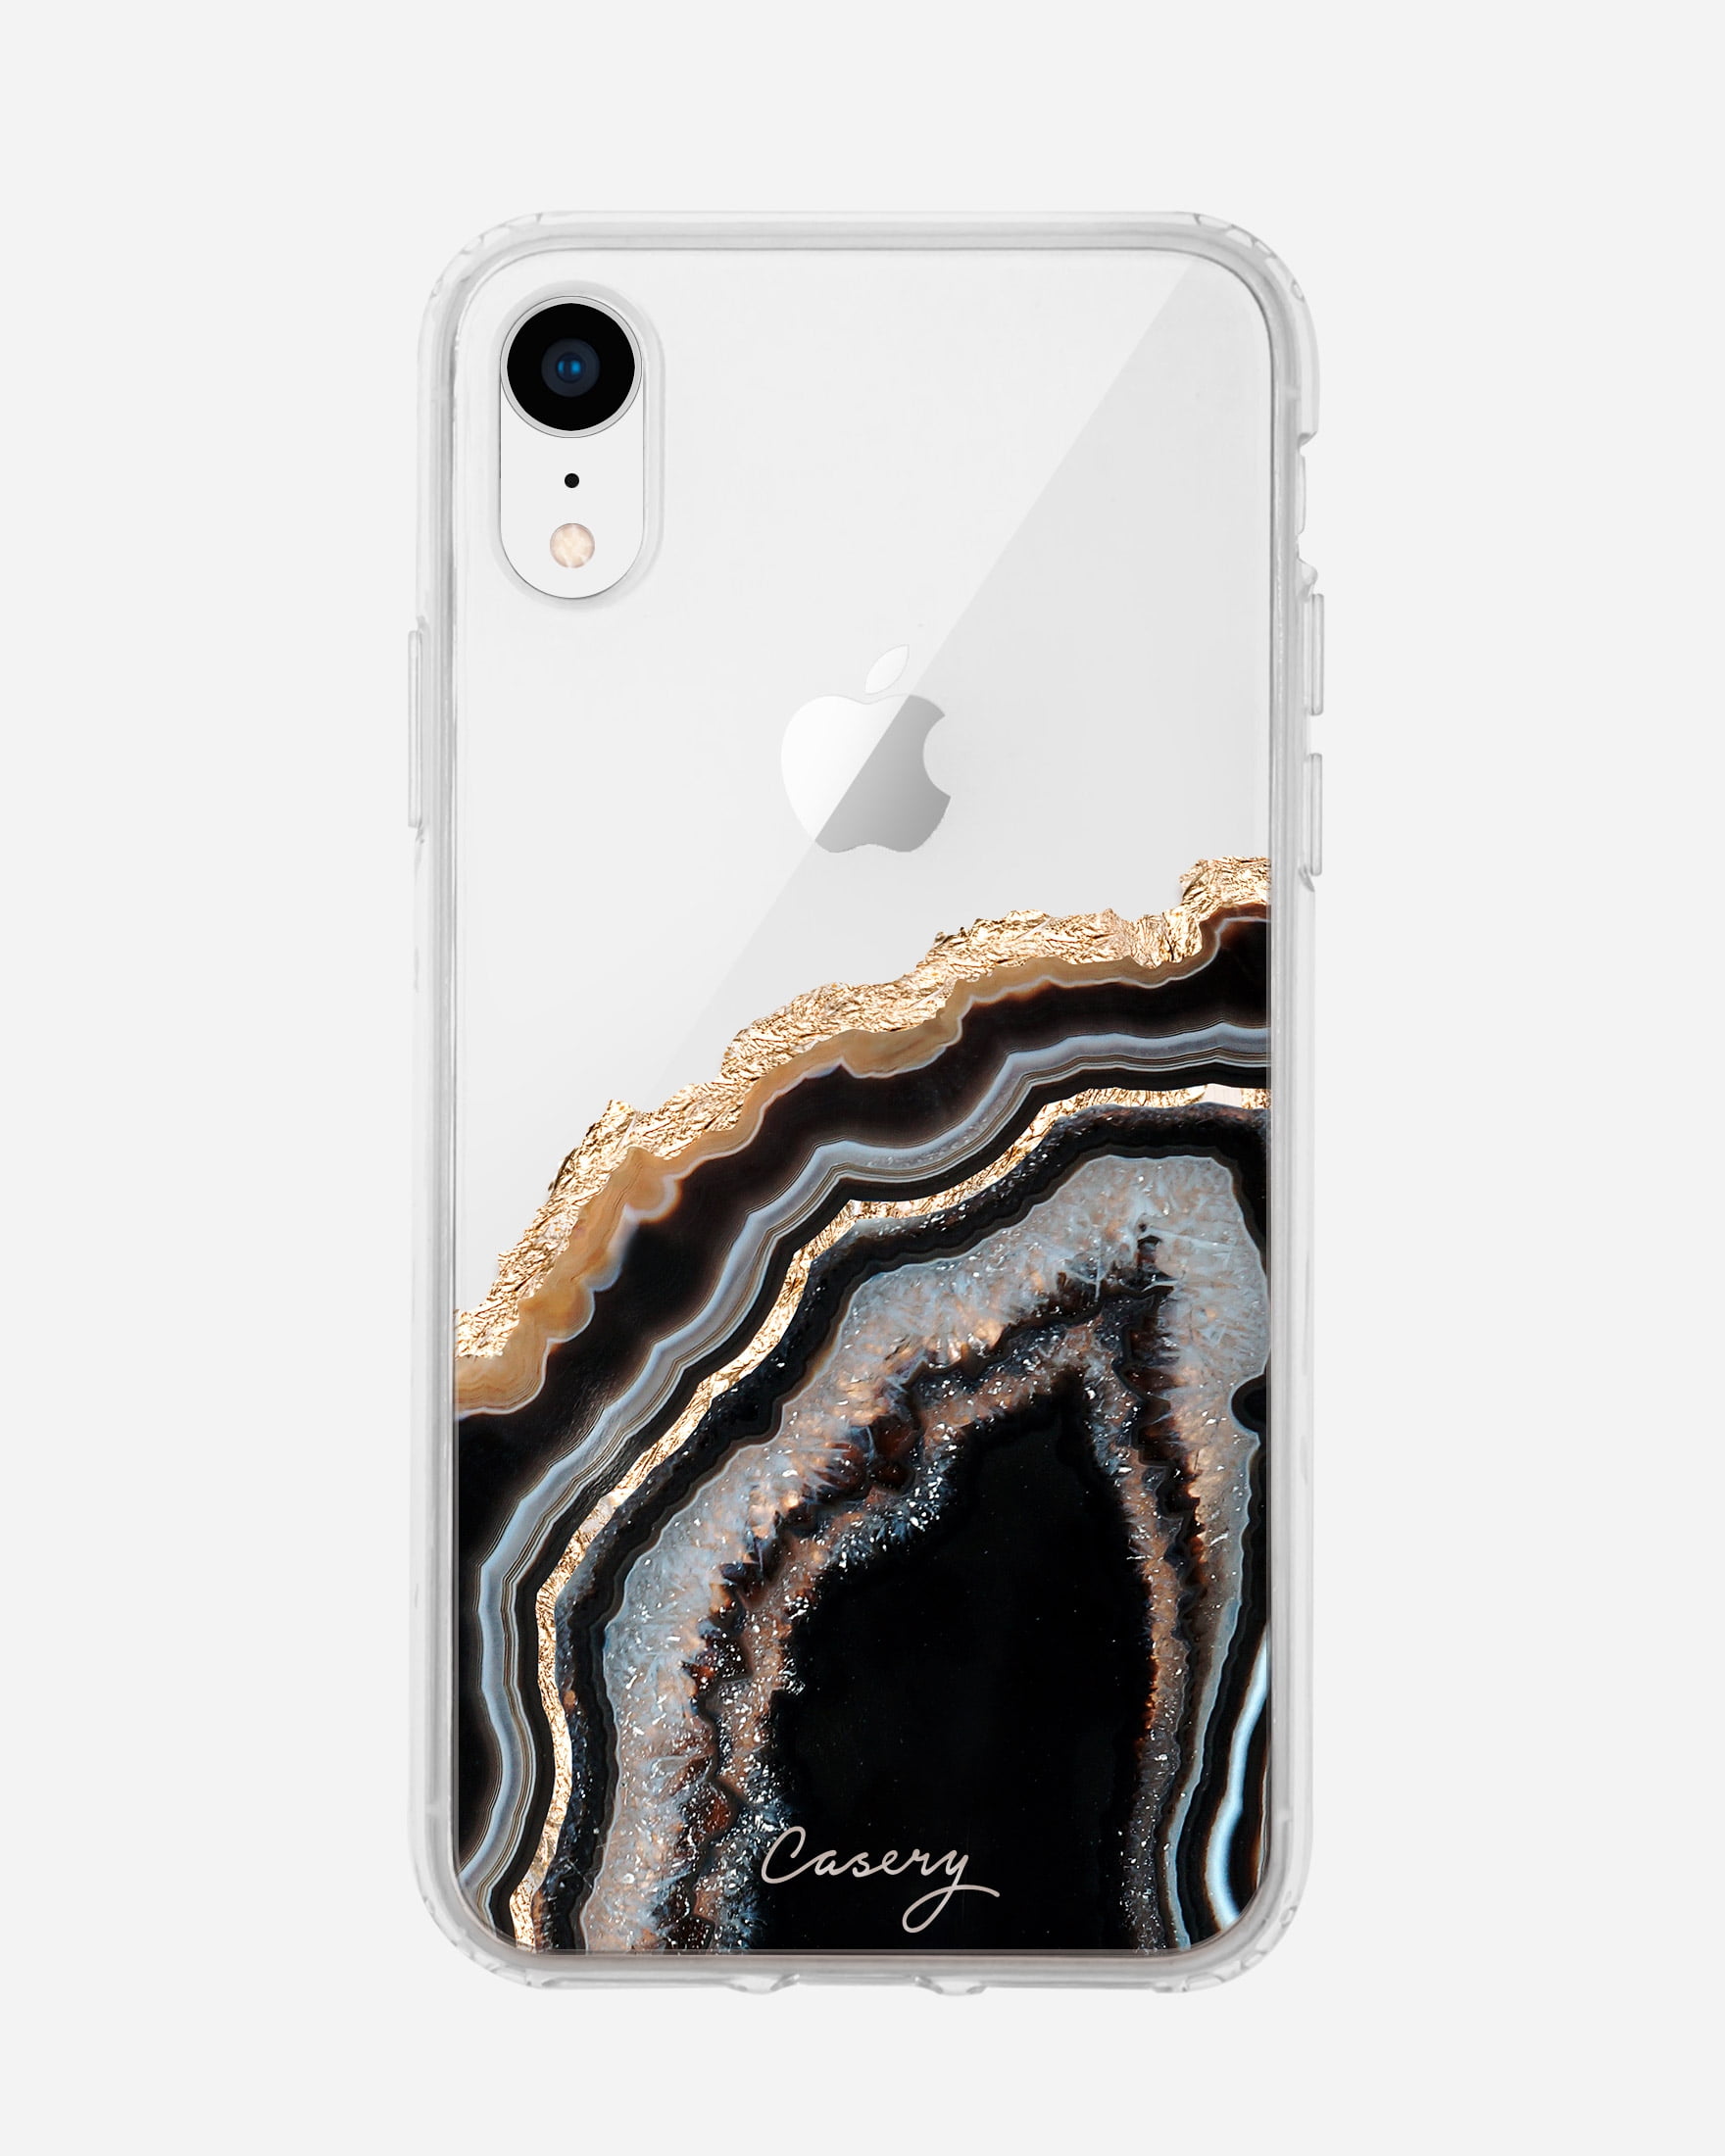 iPhone XR Case by Casery - Drop Tested - Protective Slim Clear Case